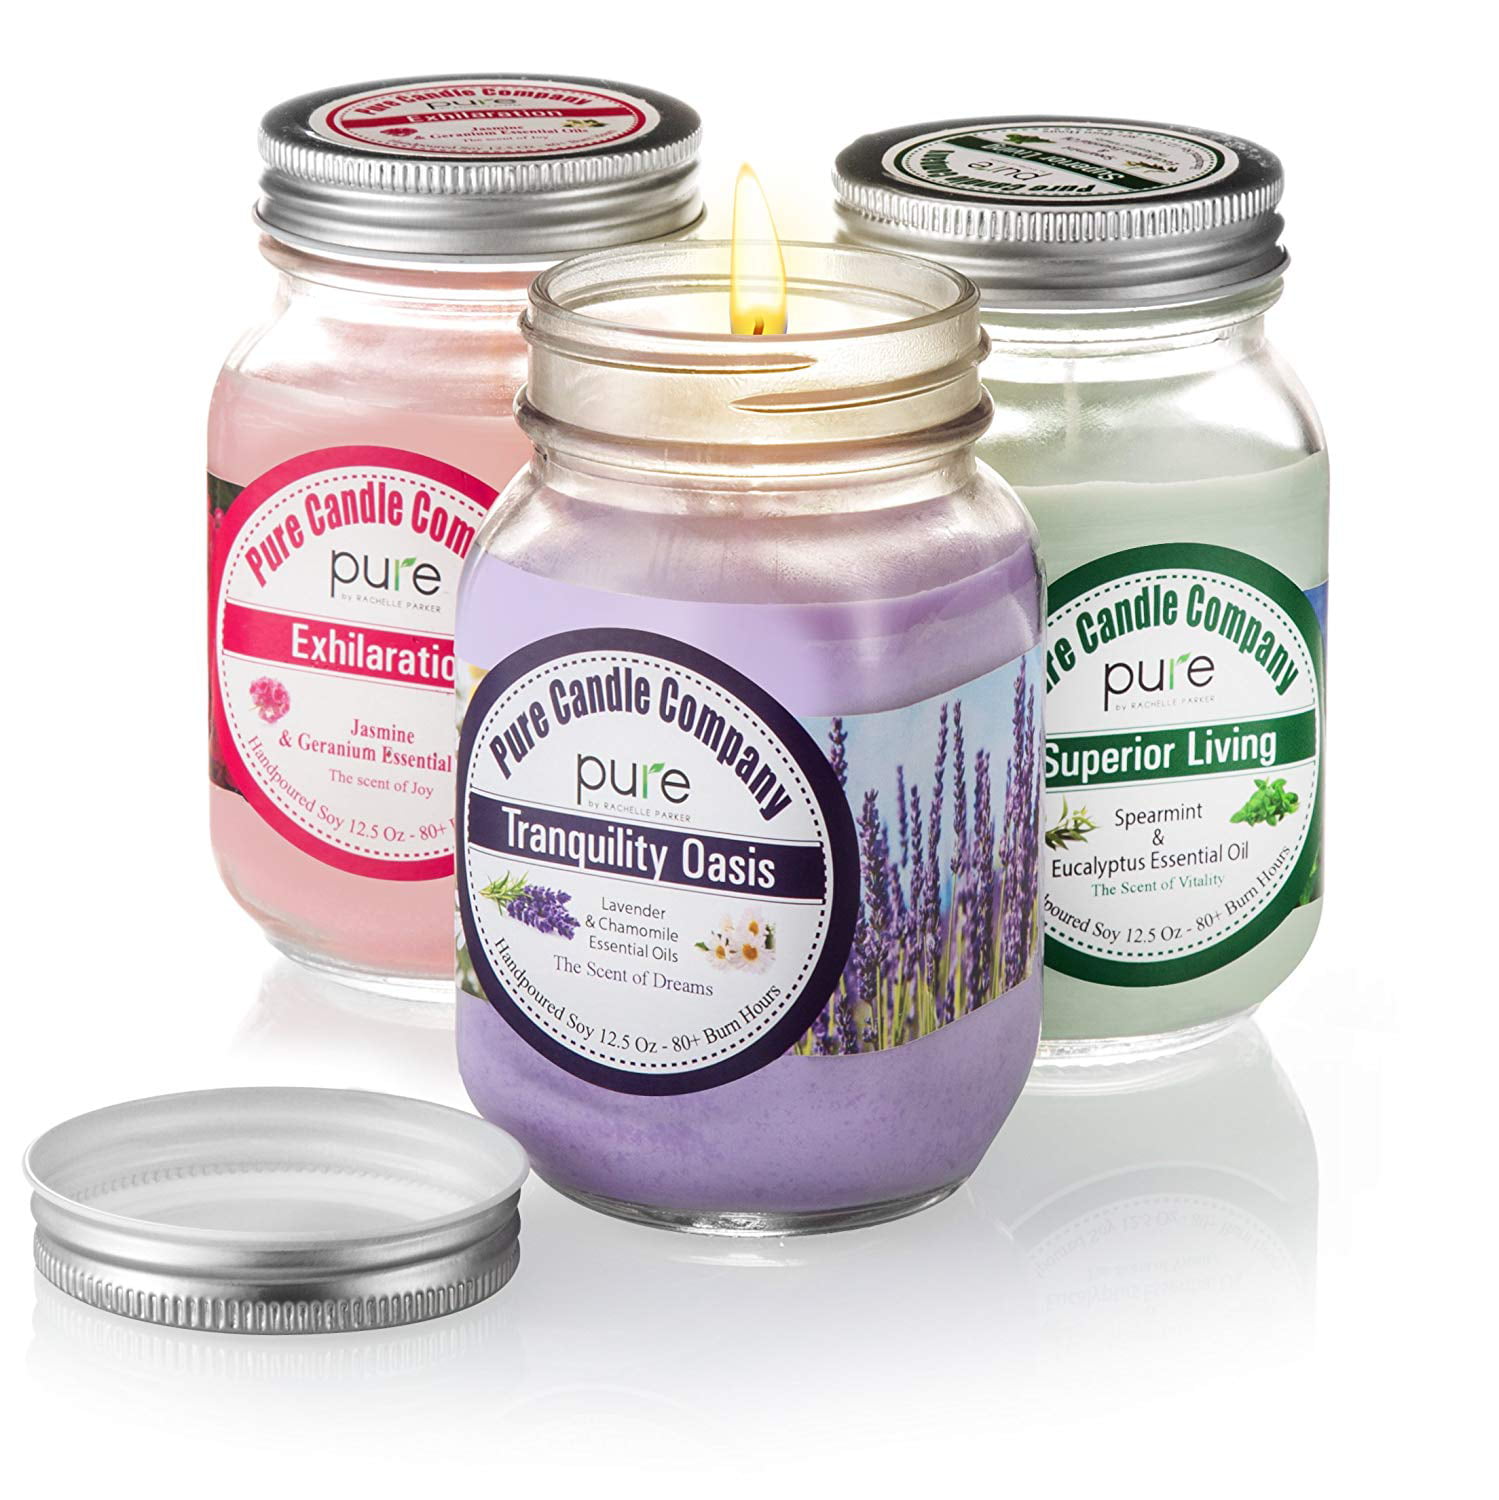 Scented Candle Pack Eco-Friendly Vegan candle Phthalate Free Premium Fragrance with Essential oil Mason Jar Soy Candle Gift Set